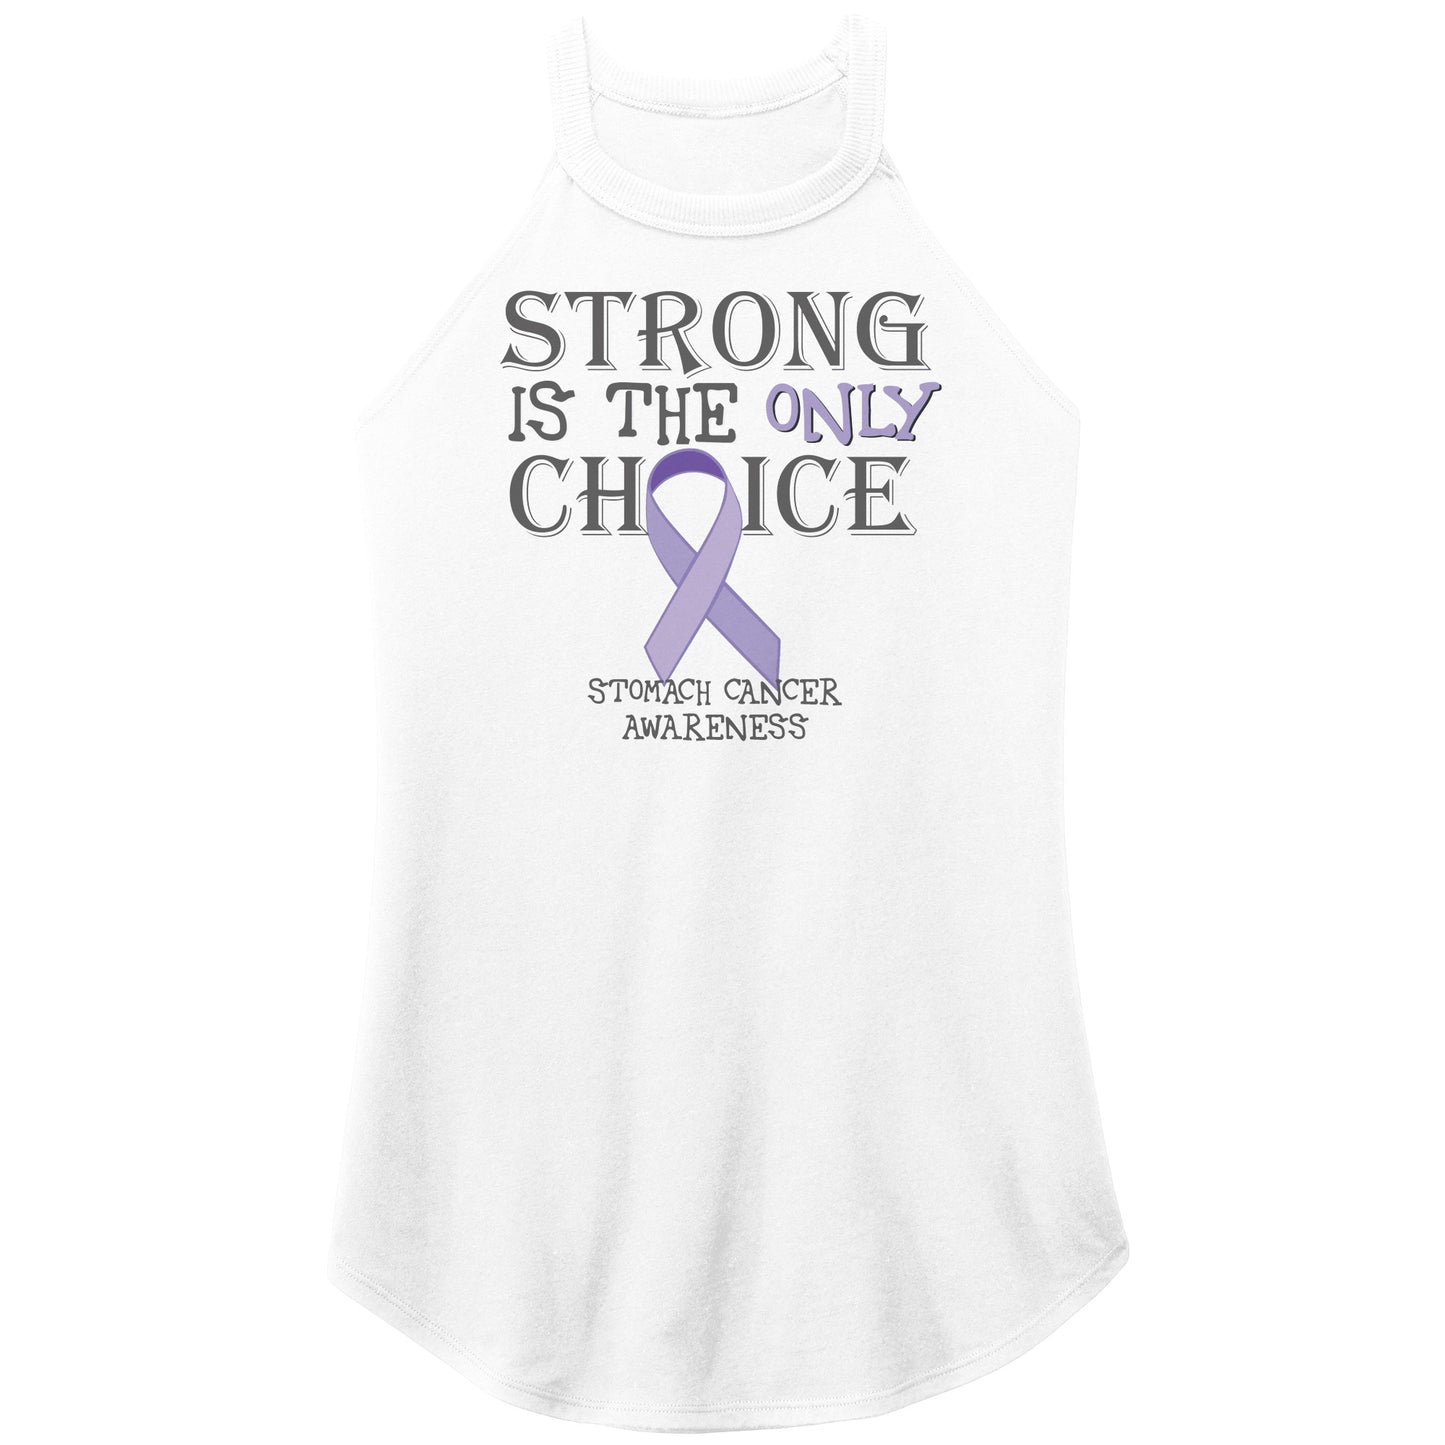 Strong is the Only Choice -Stomach Cancer Awareness T-Shirt, Hoodie, Tank